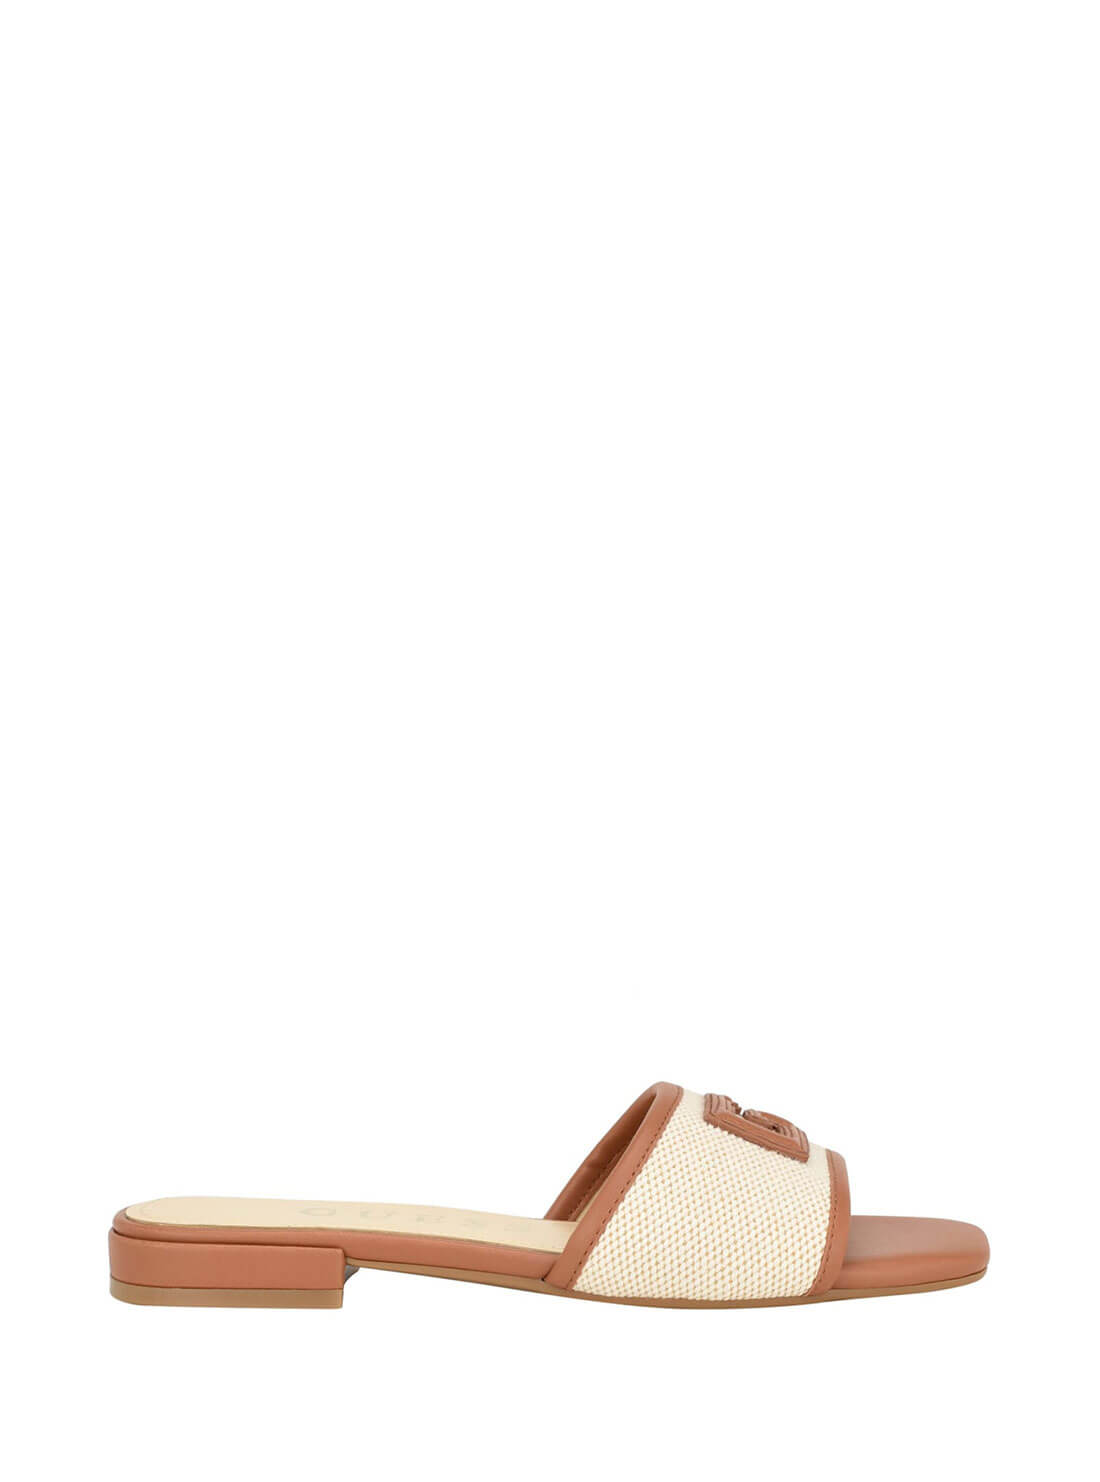 Tan Tampa Slide Sandals | GUESS Women's Shoes | side view